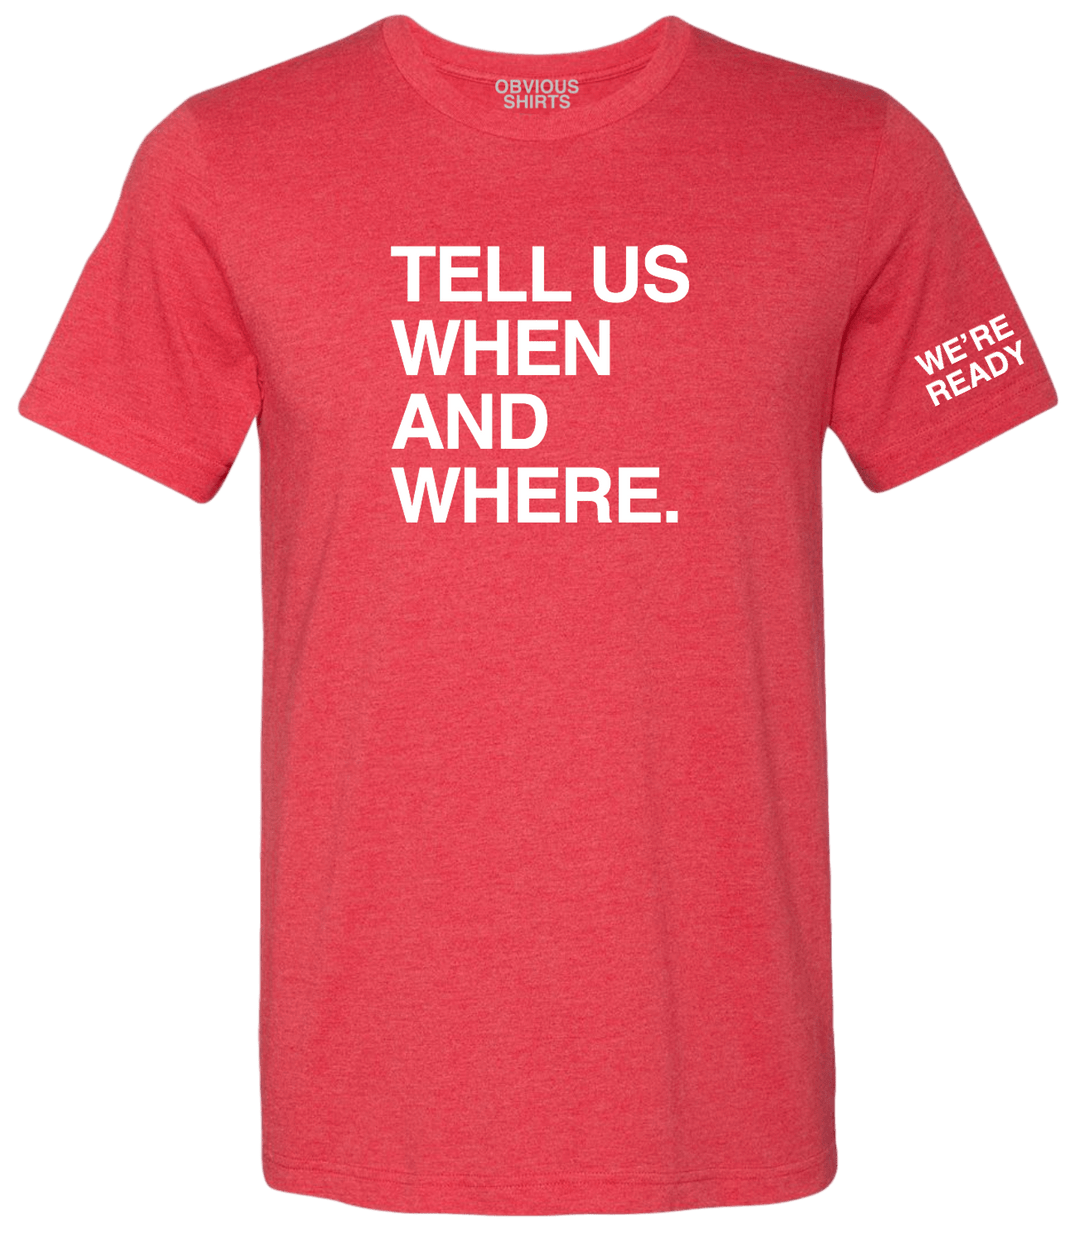 TELL US WHEN AND WHERE. - OBVIOUS SHIRTS.